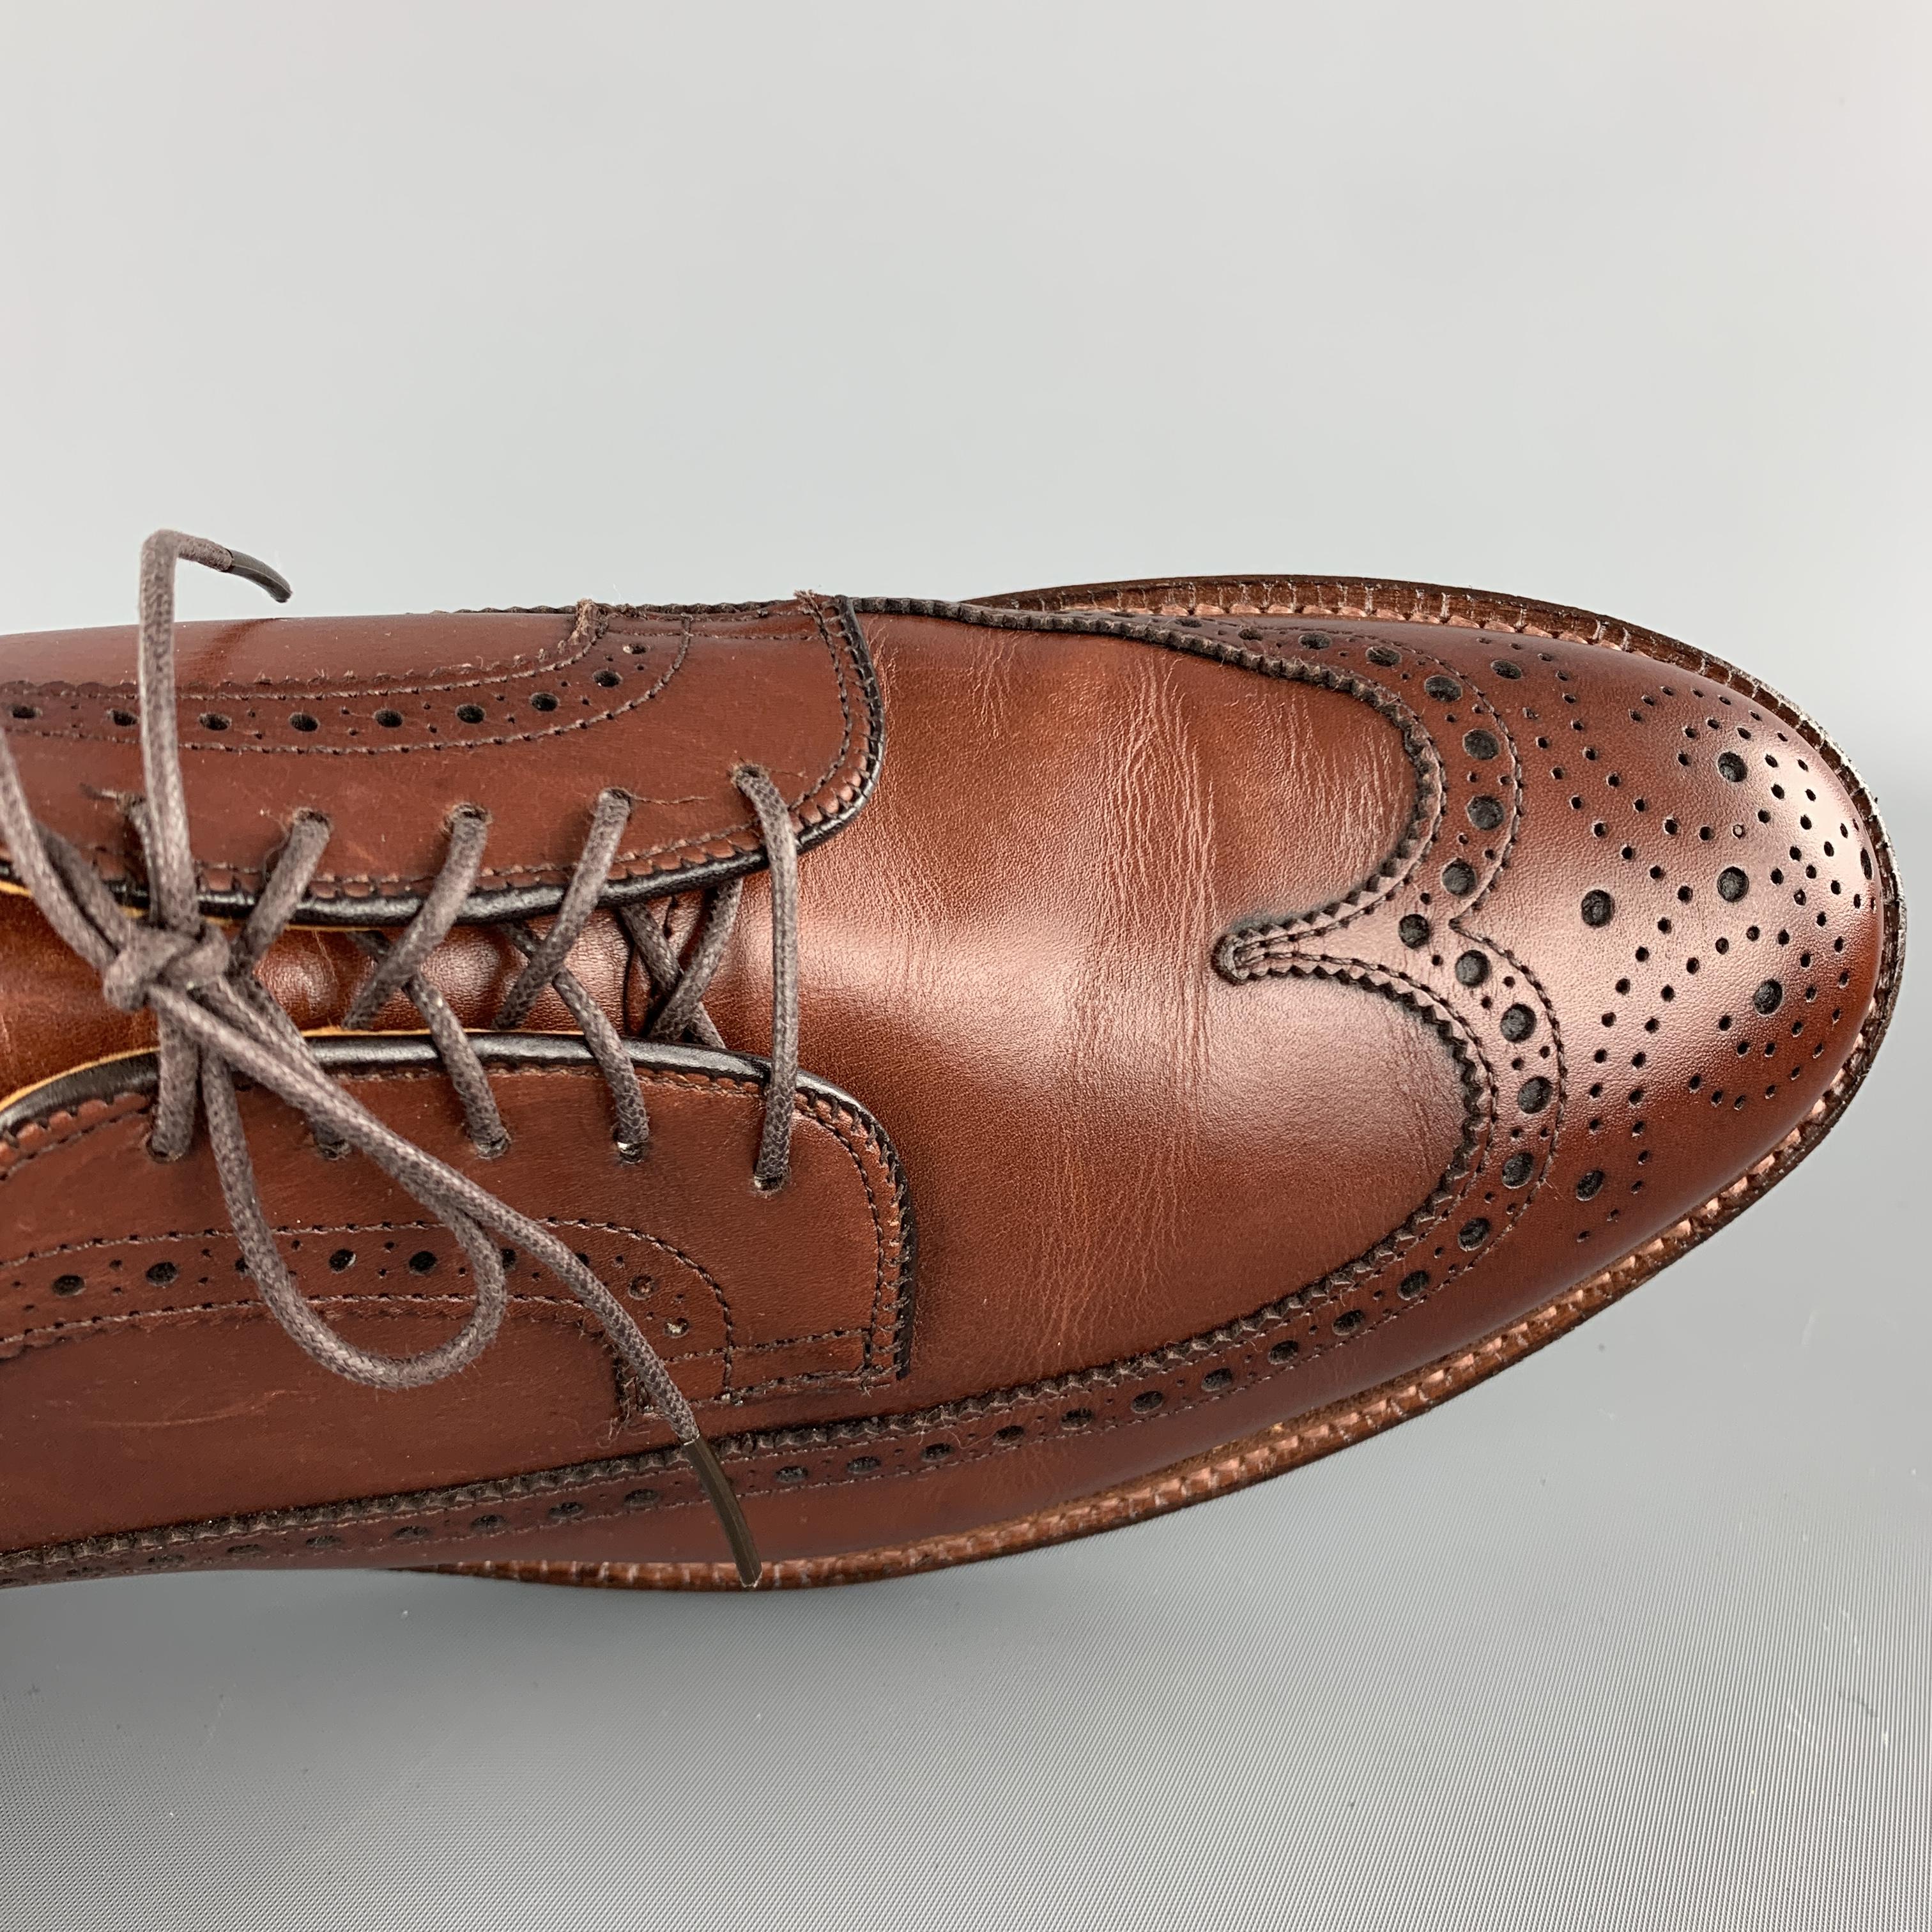 ALDEN brogue comes in tan brown leather with a wingtip and perforated trim. With box. Made in USA.

Excellent Pre-Owned Condition.
Marked: 10 1/2 D

Outsole: 12.75 x 4.5 in.